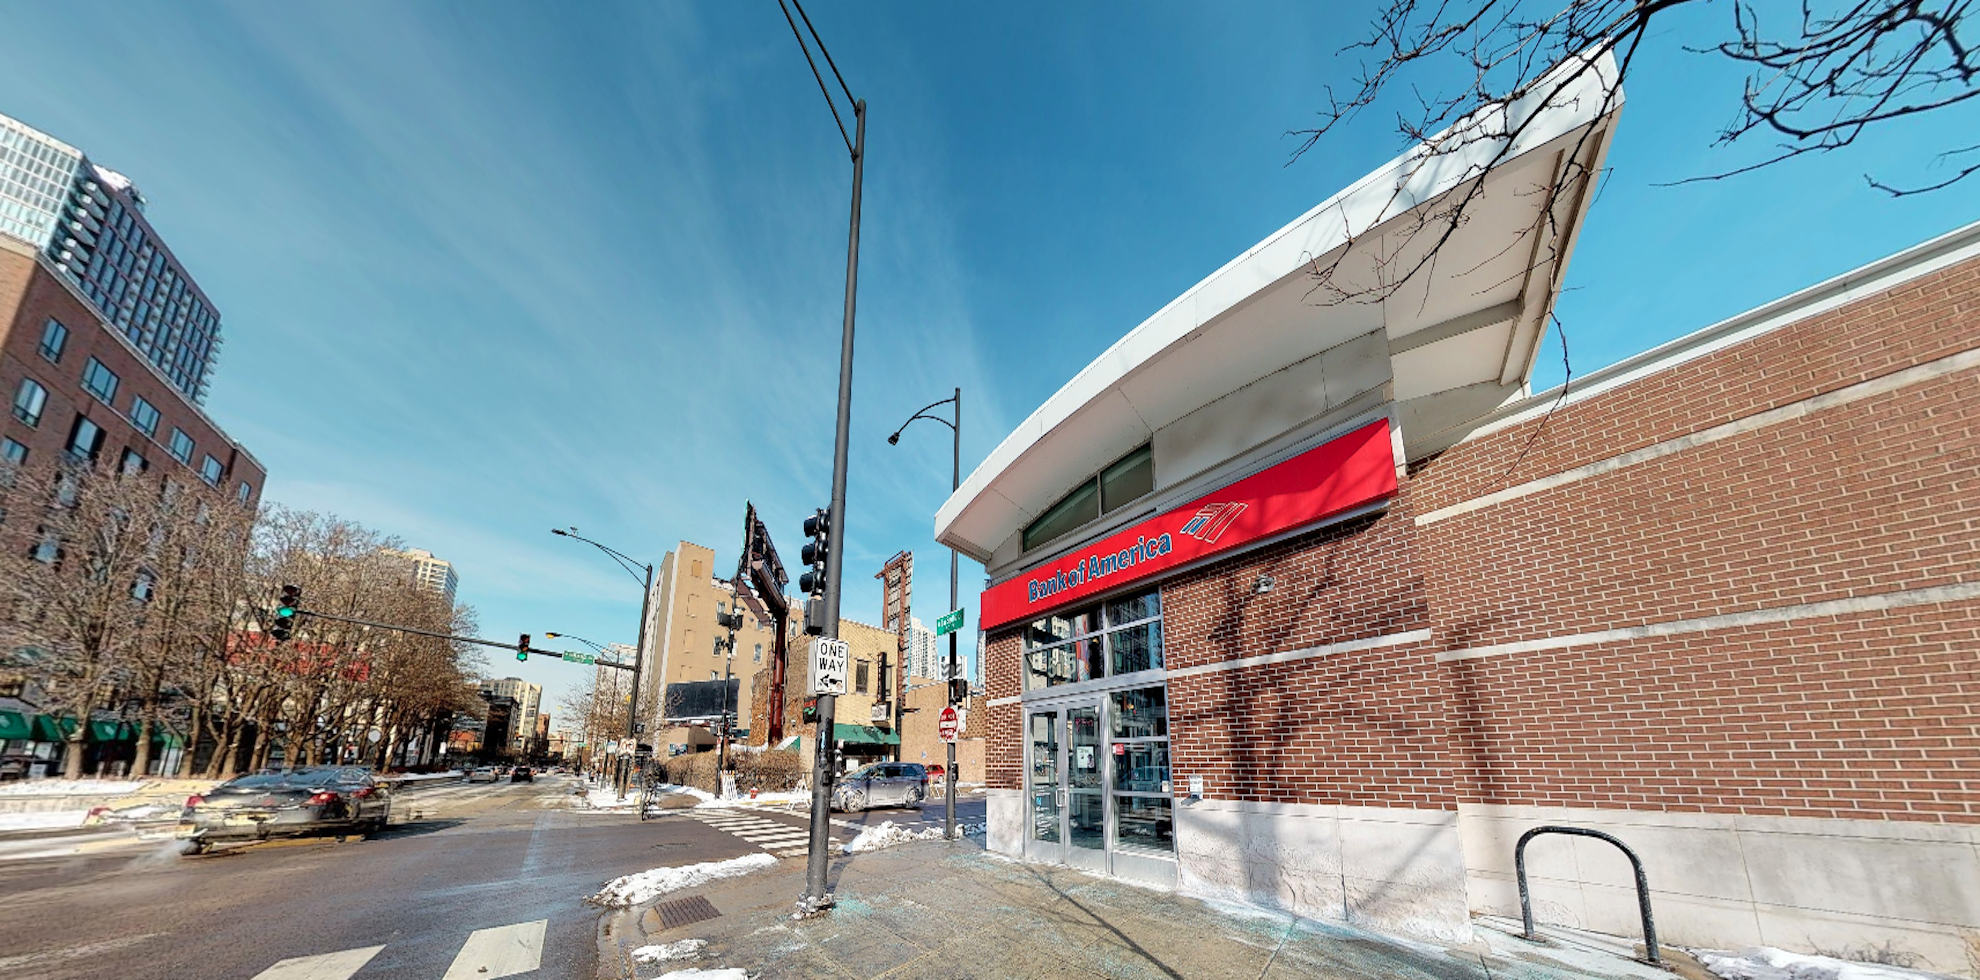 Bank of America financial center with drive-thru ATM | 515 N La Salle Dr, Chicago, IL 60654